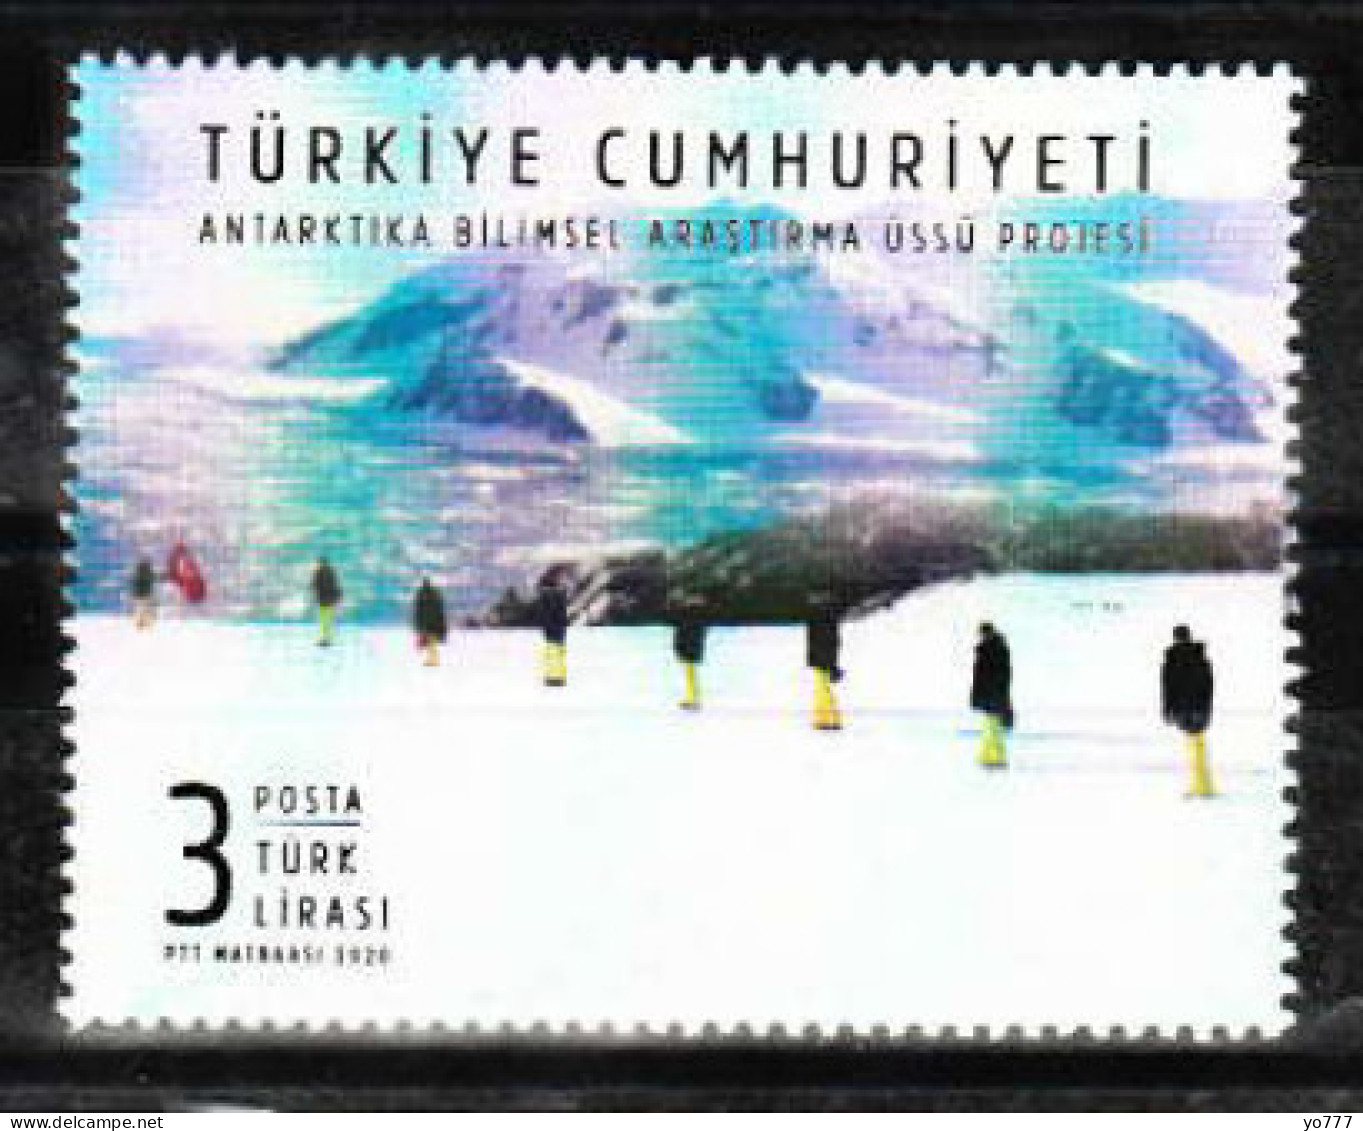 (4545) THE PROJECT OF SCIENTIFIC RESEARCH STATION ANTARCTICA MNH** - Neufs